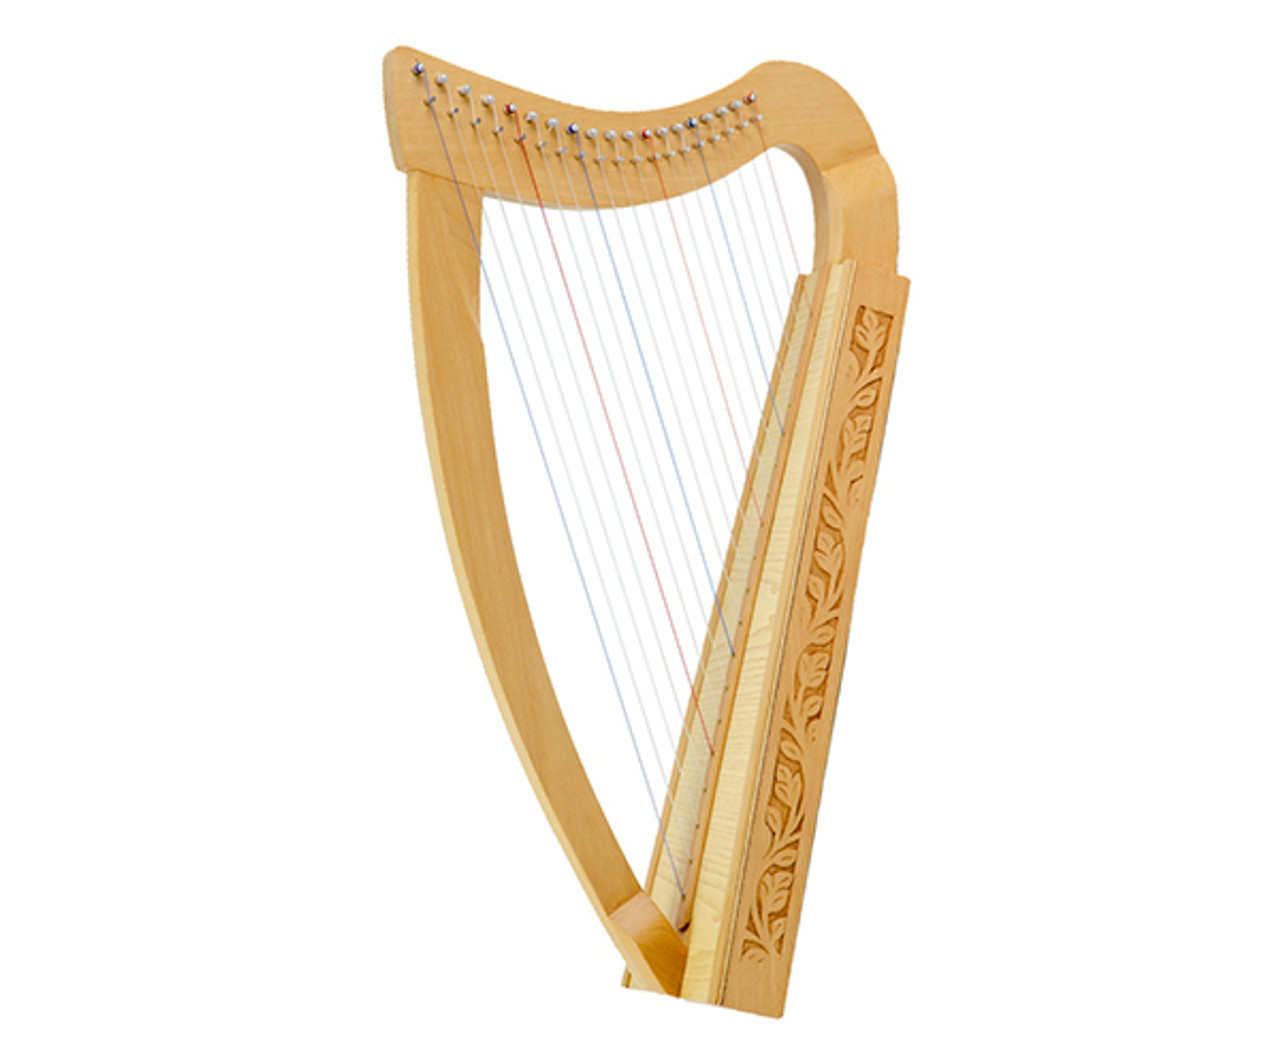 Pixie Harp 19 String Carved Leaning